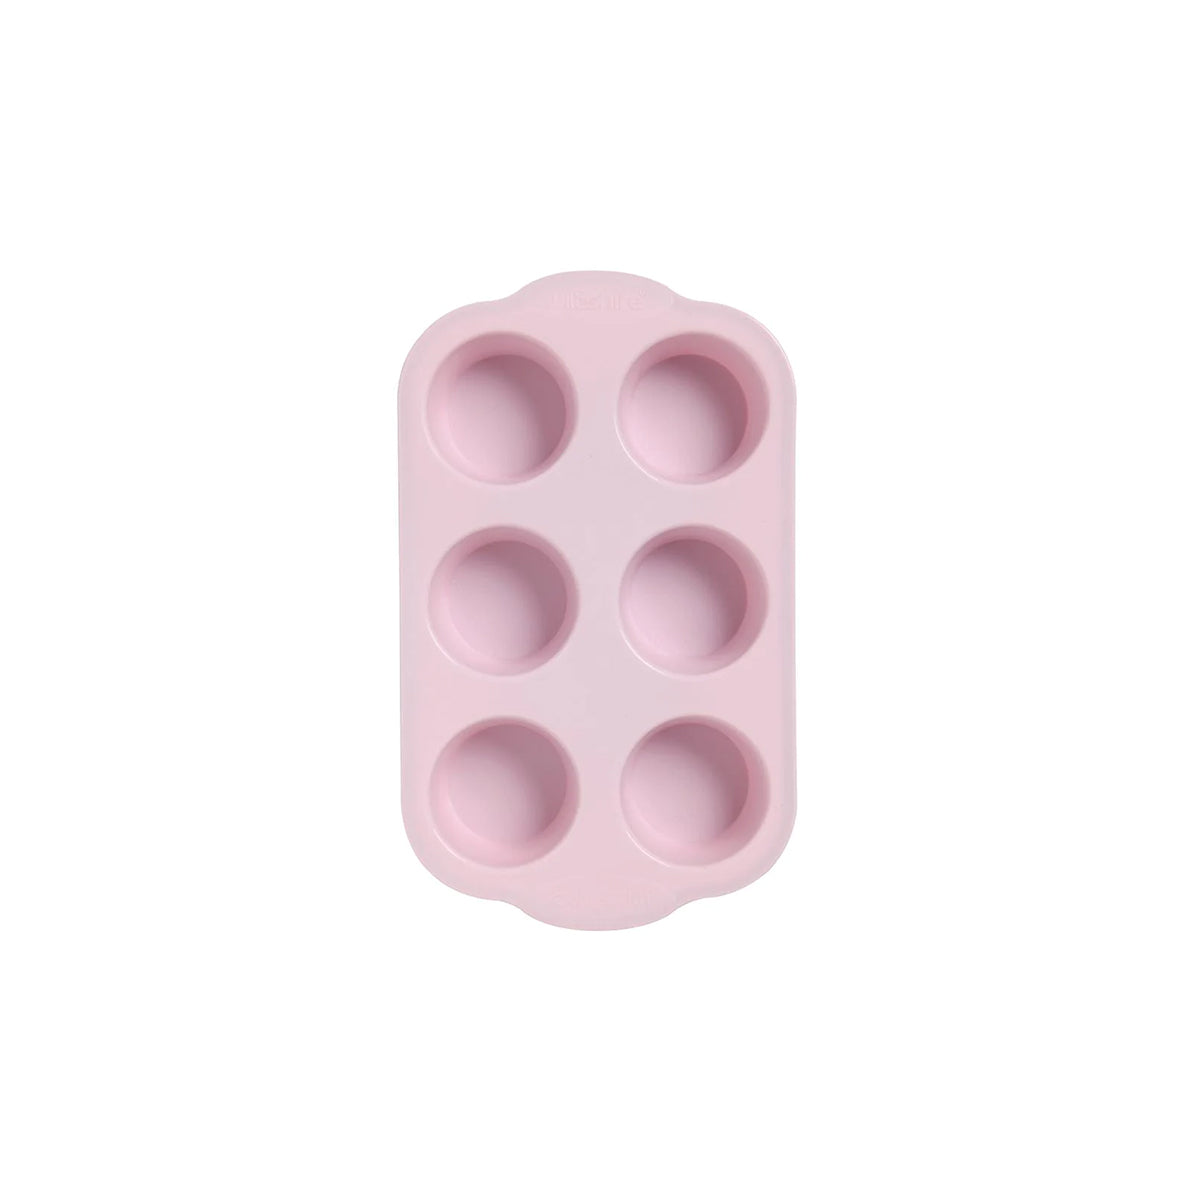 WLT40245 WILTSHIRE Silicone 6 Cup Muffin Pan Tomkin Australia Hospitality Supplies